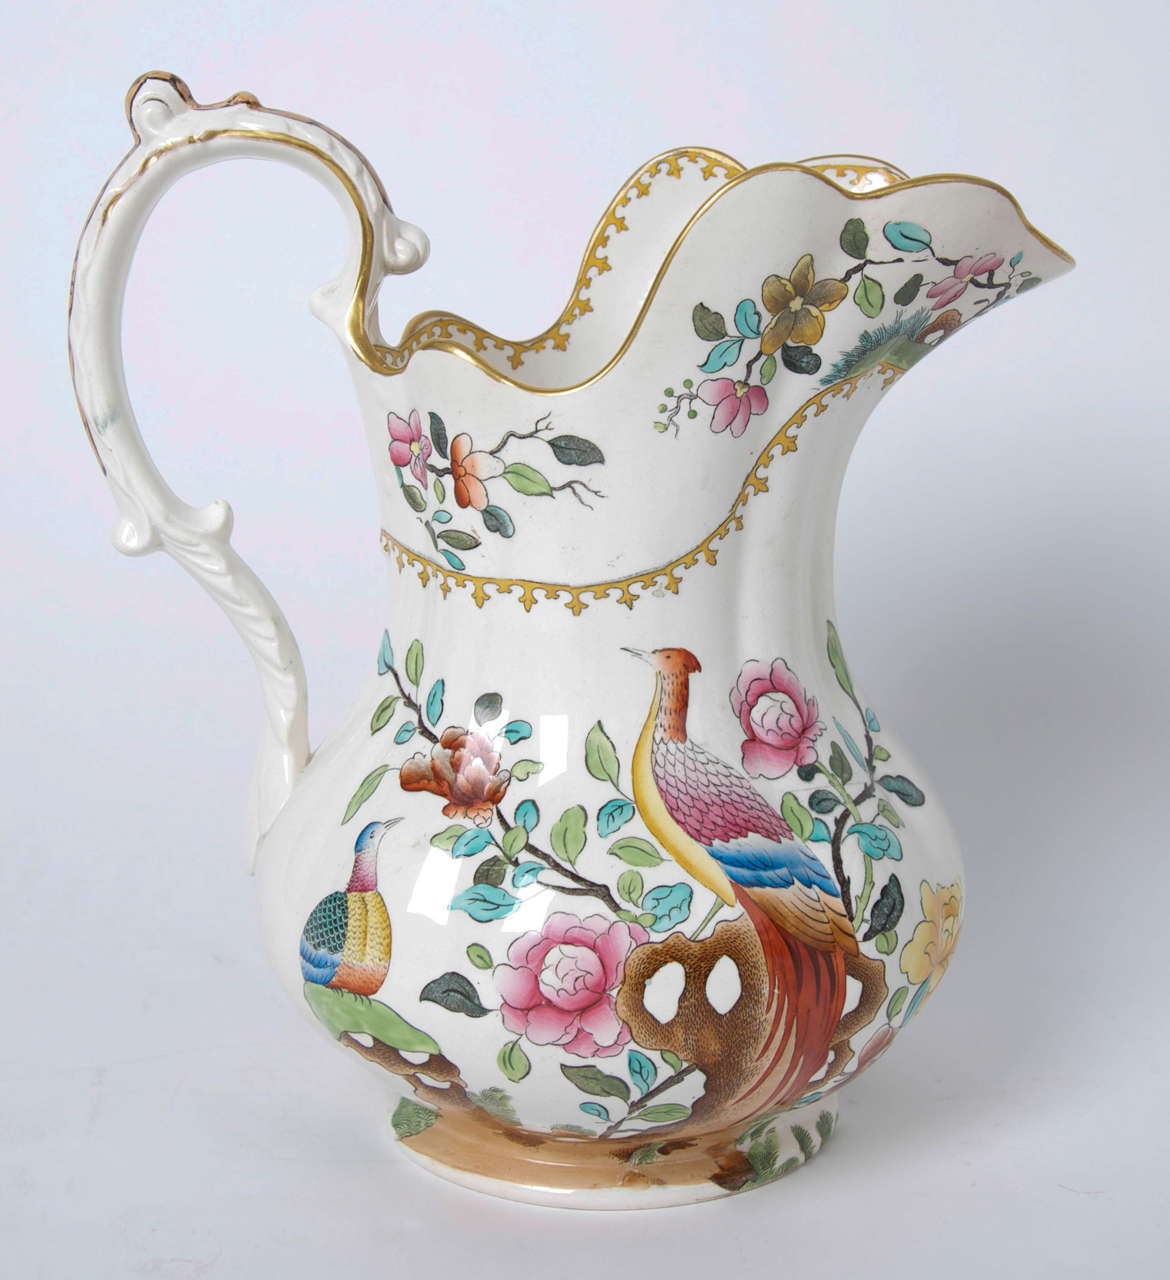 This is a very large and impressive Jug or Pitcher over 12 inches tall, made of earthenware pottery by the Copeland (Late Spode) factory in the late 19th century of Victorian England.

This piece is made of earthenware and is well decorated in the